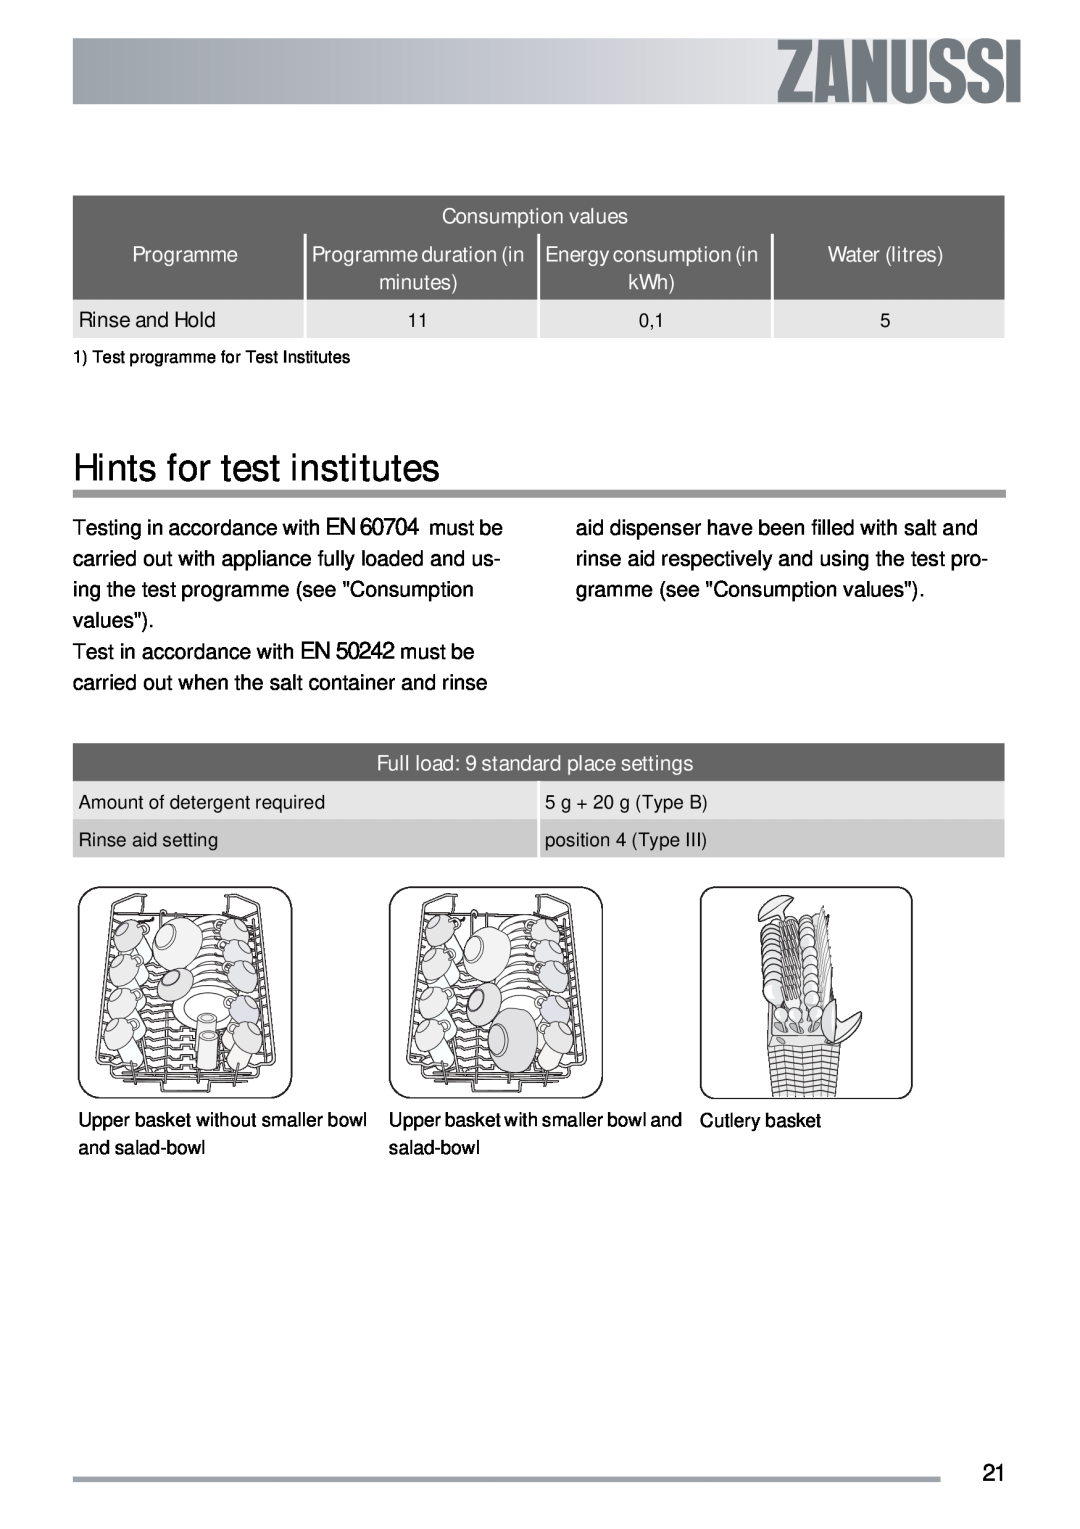 Zanussi ZDTS 101 user manual Hints for test institutes 